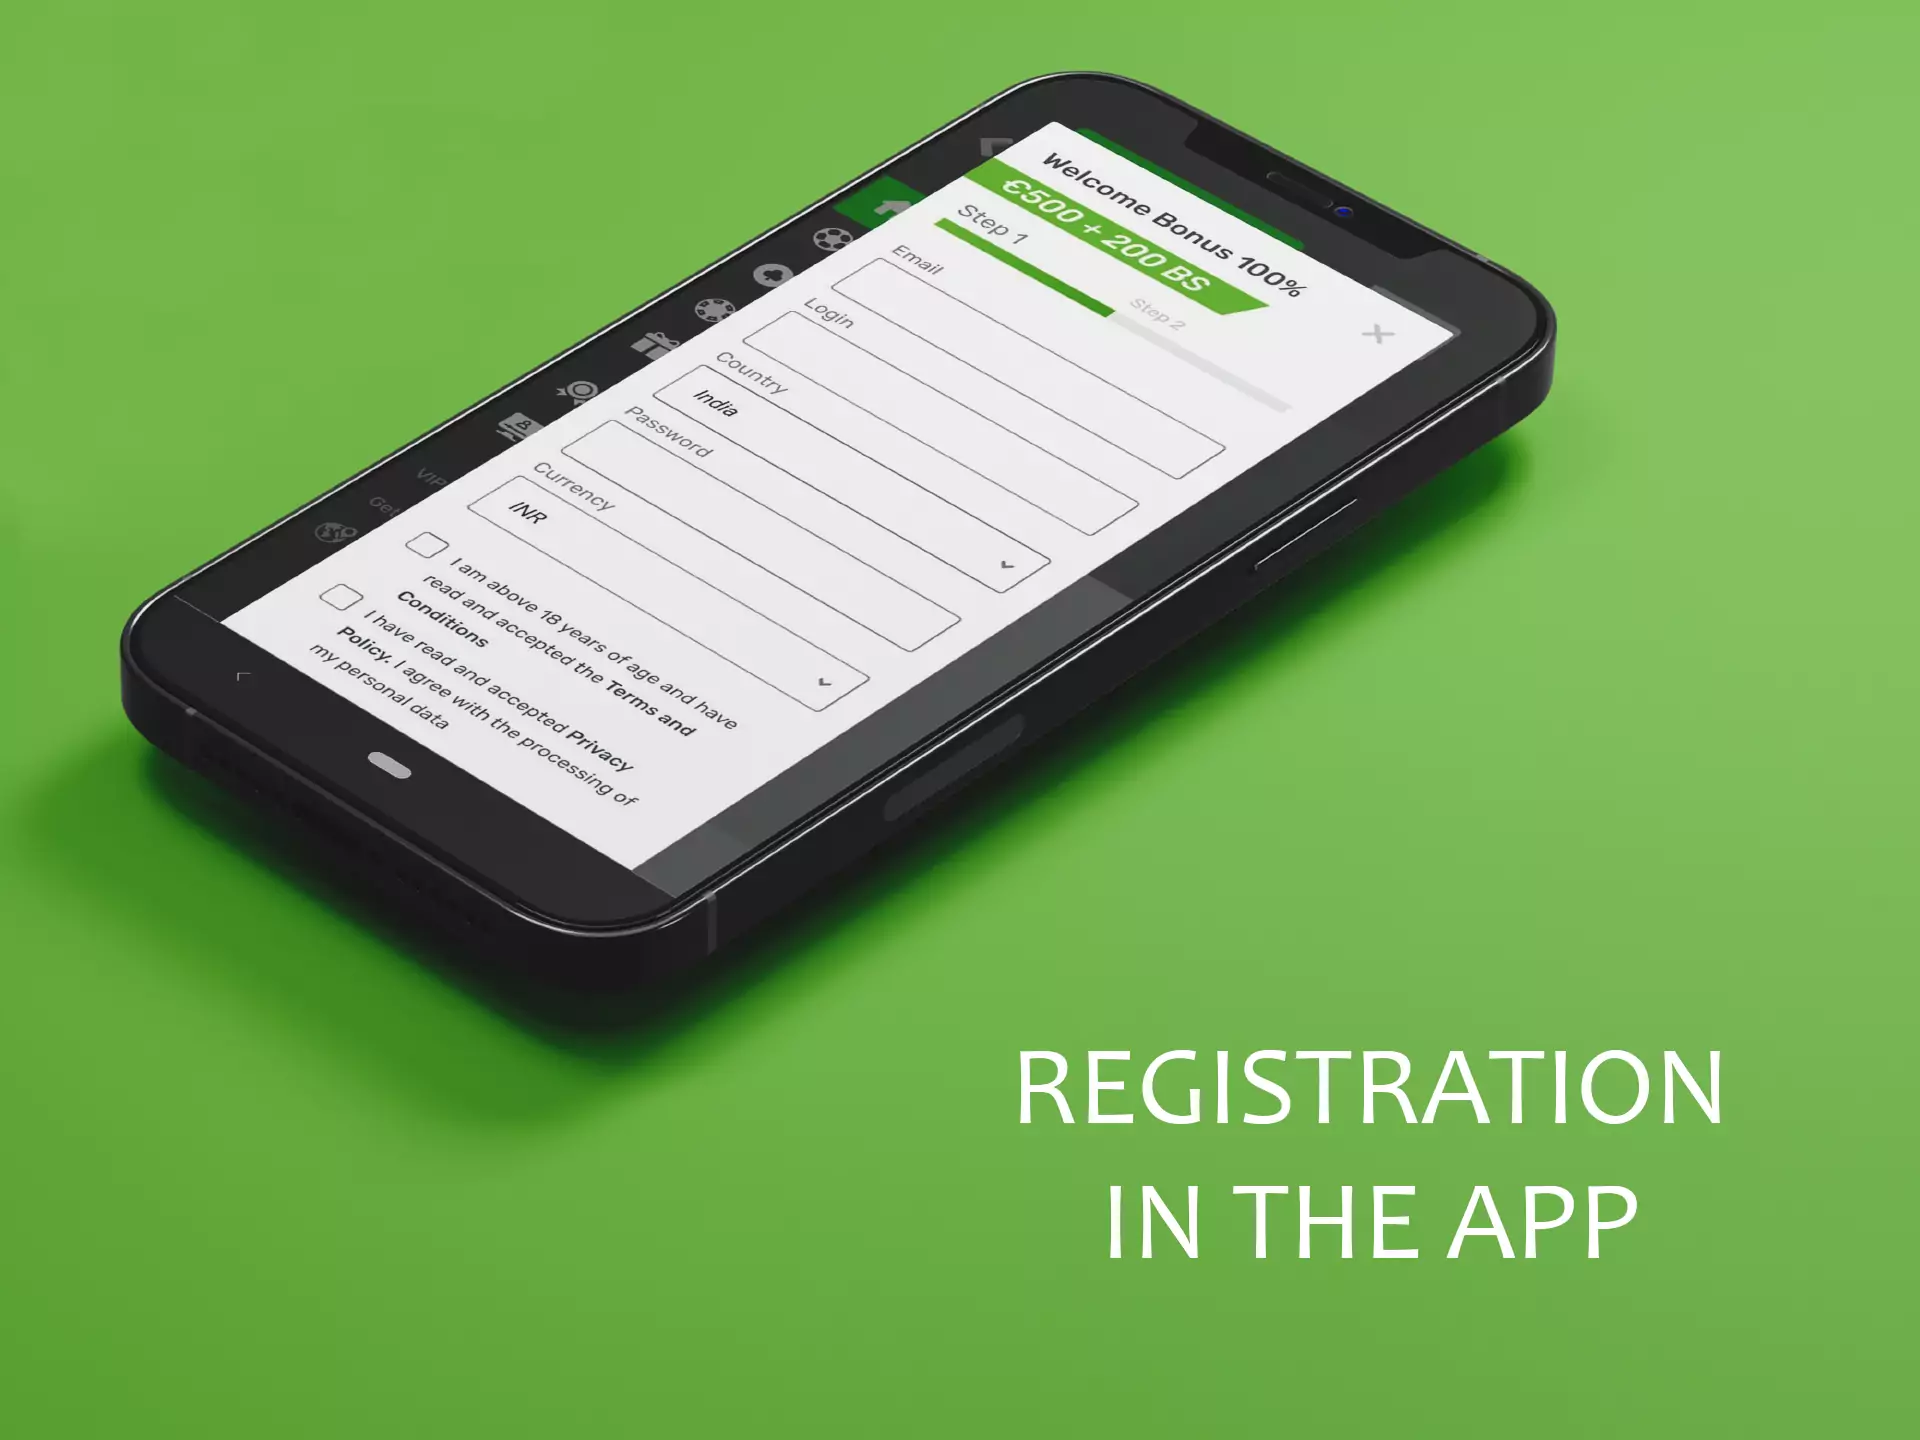 Run the app and fill the fields of the form to create a new account.